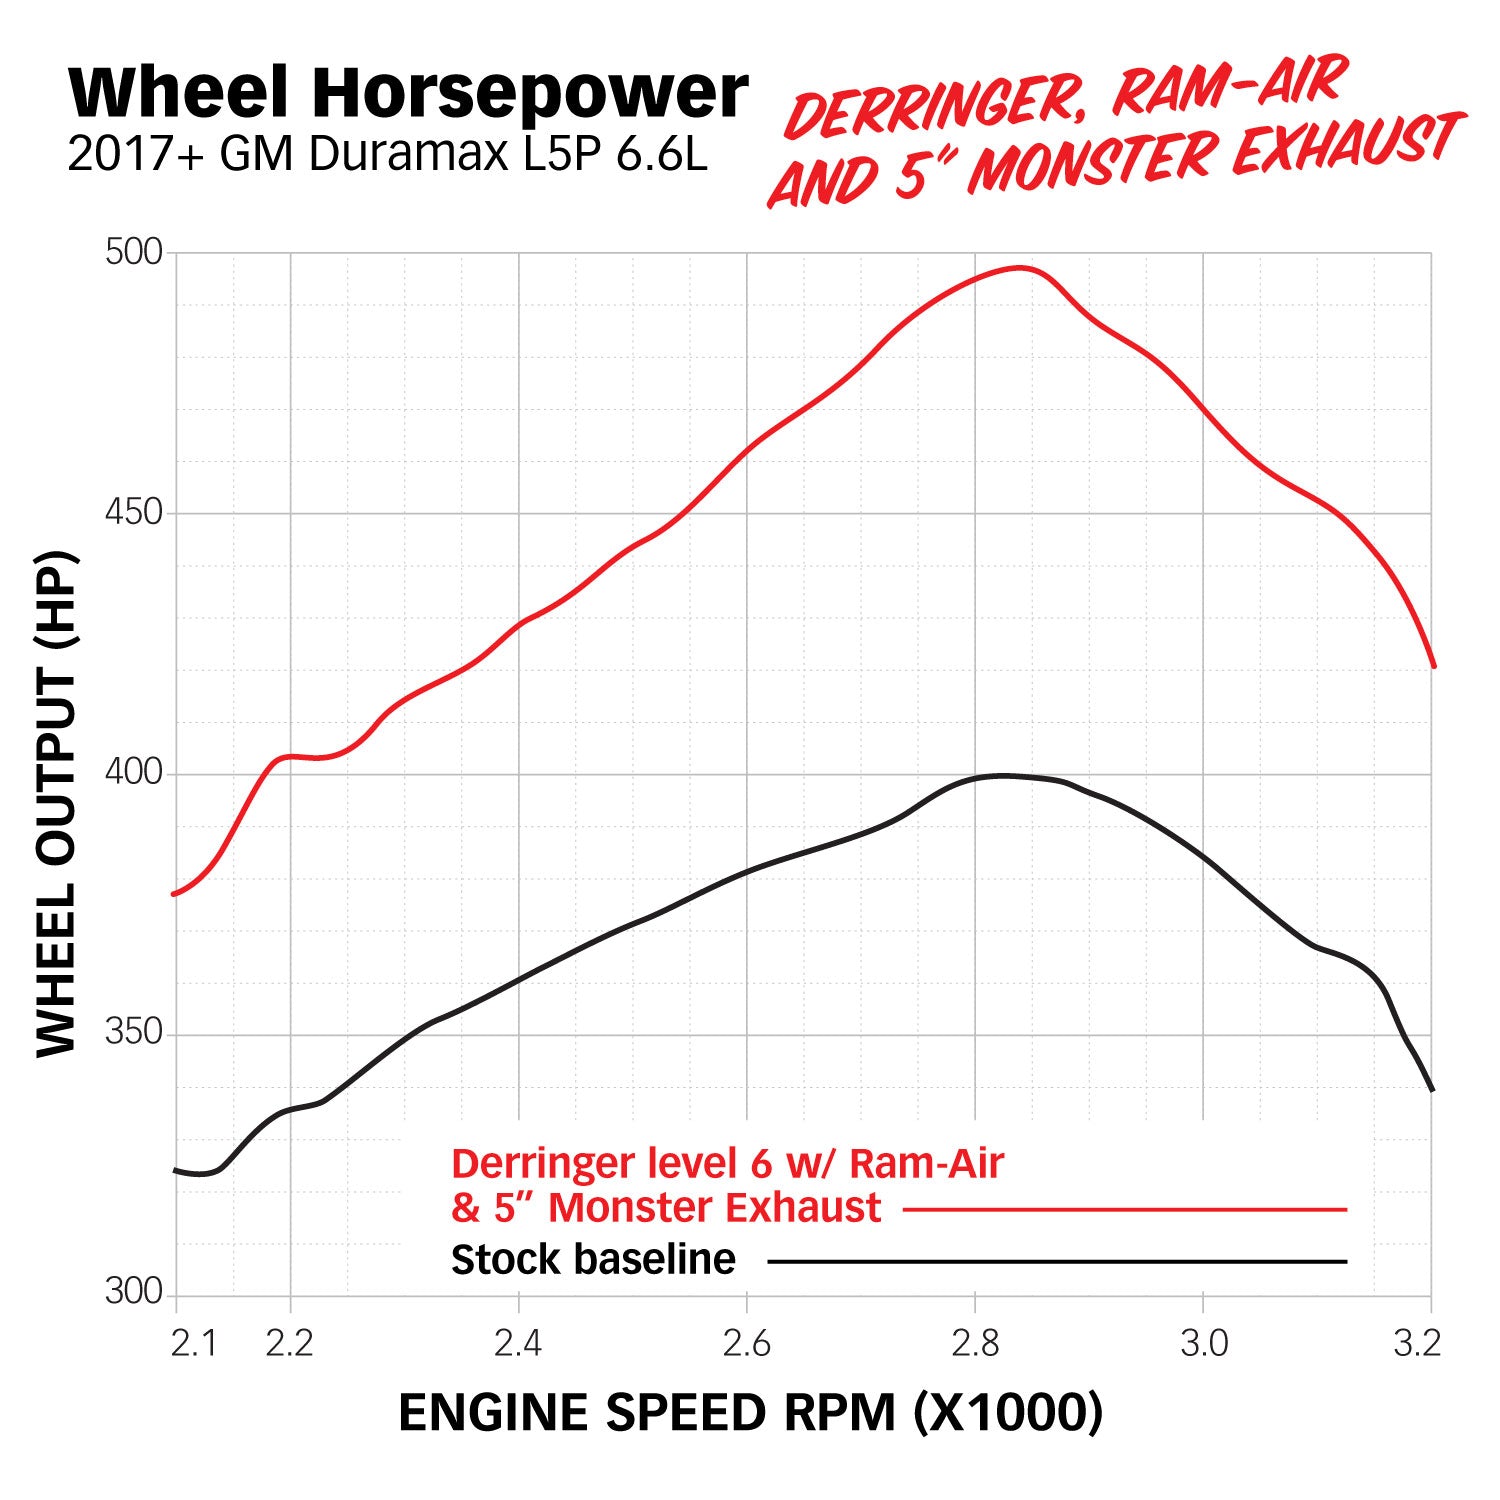 Dyno chart showing horsepower gains with the Derringer Tuner and Supporting Mods for a 2017+ L5P